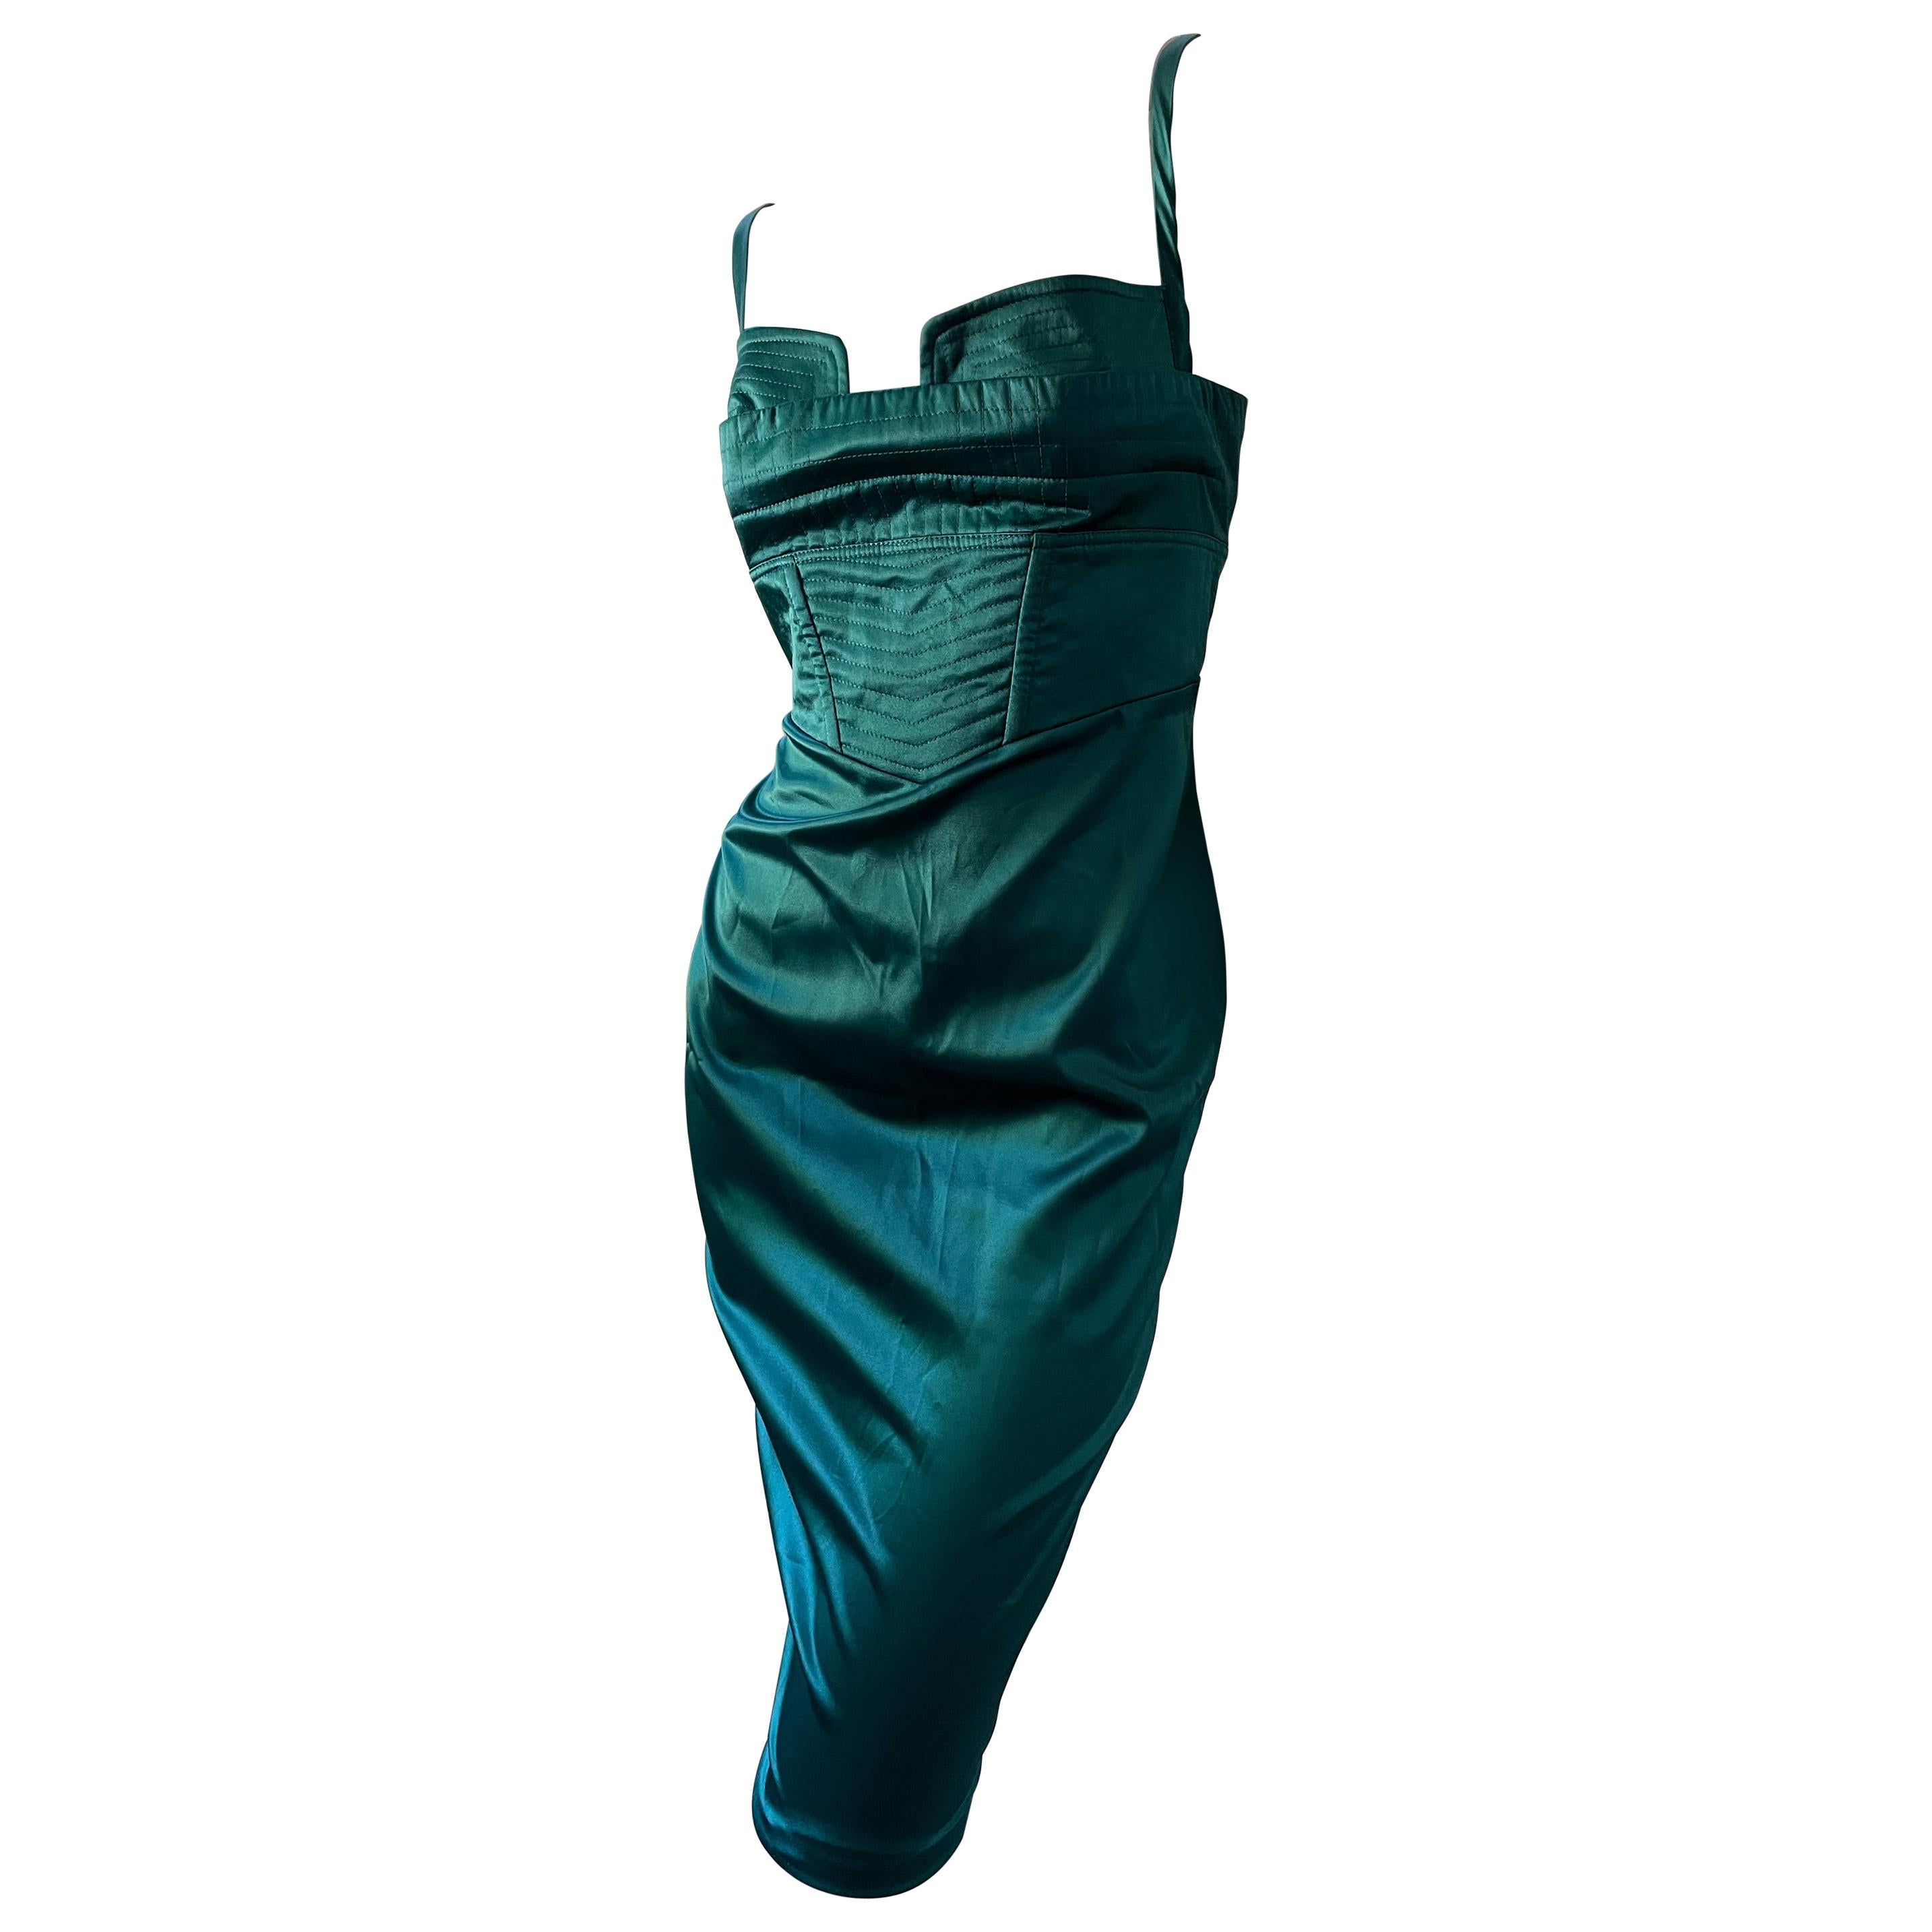 Just Cavalli Emerald Green Cocktail Dress by Roberto Cavalli For Sale